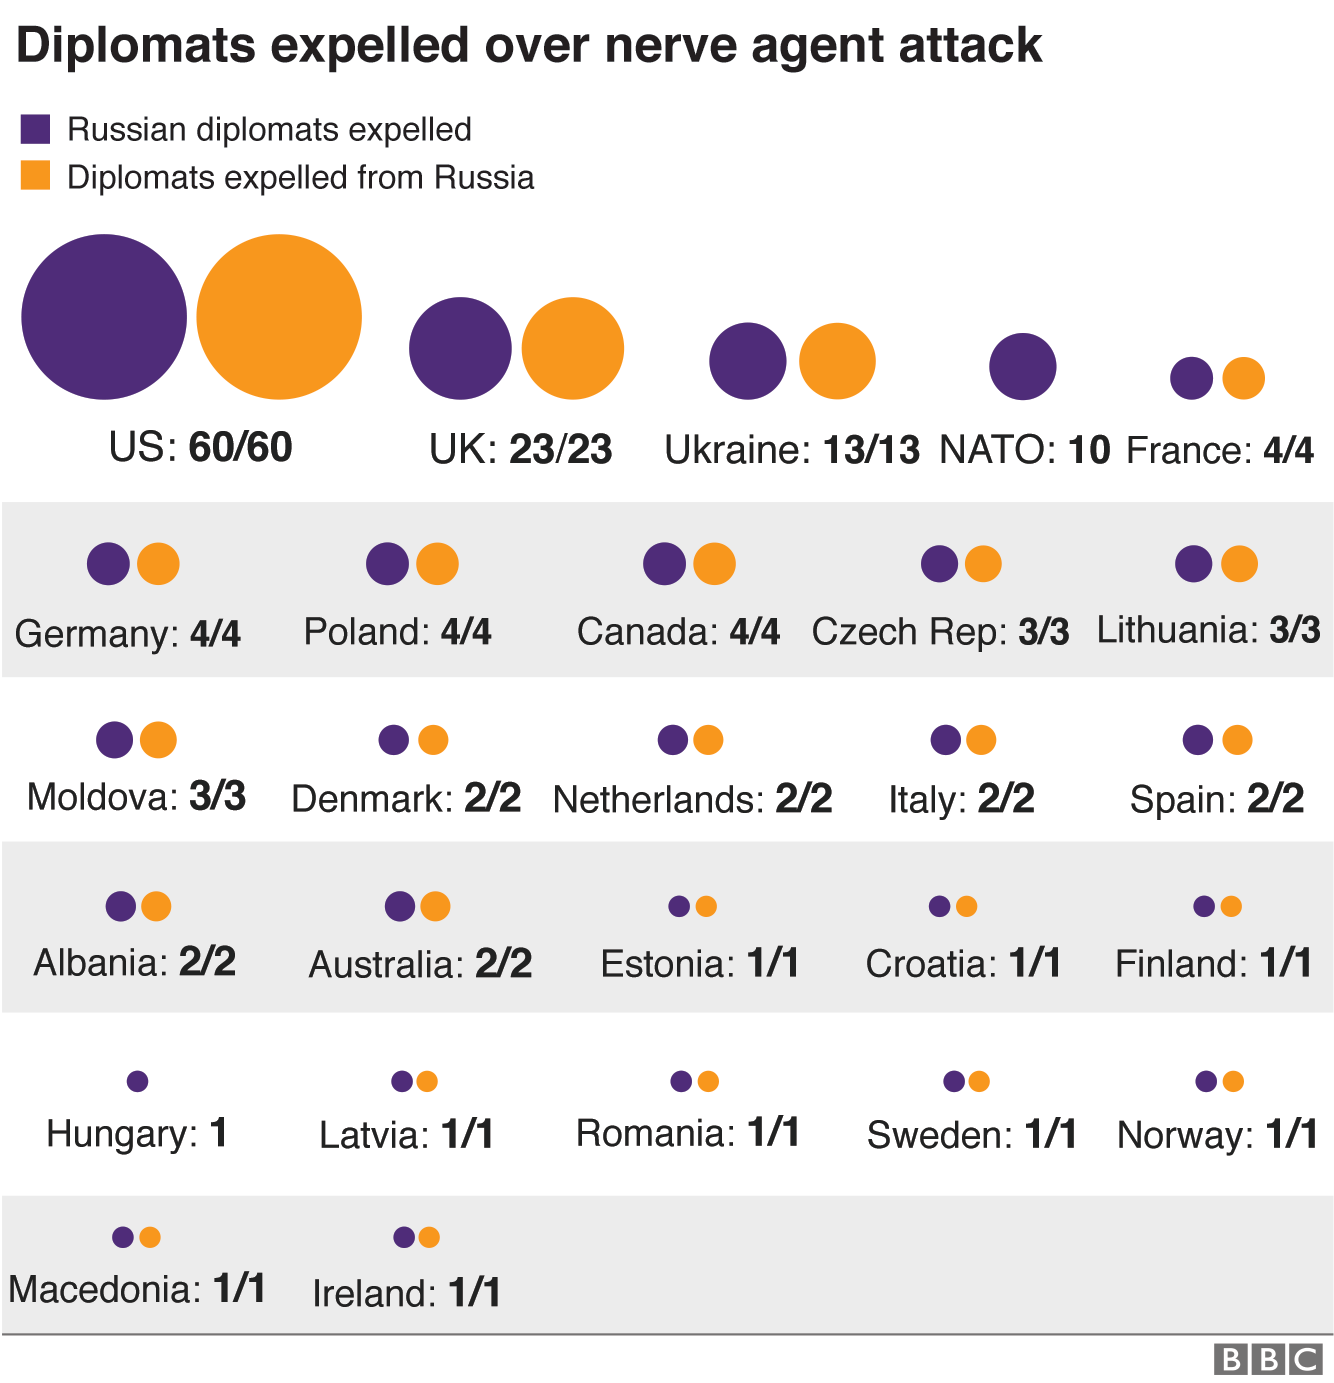 Graphic showing diplomats expelled over nerve agent attack